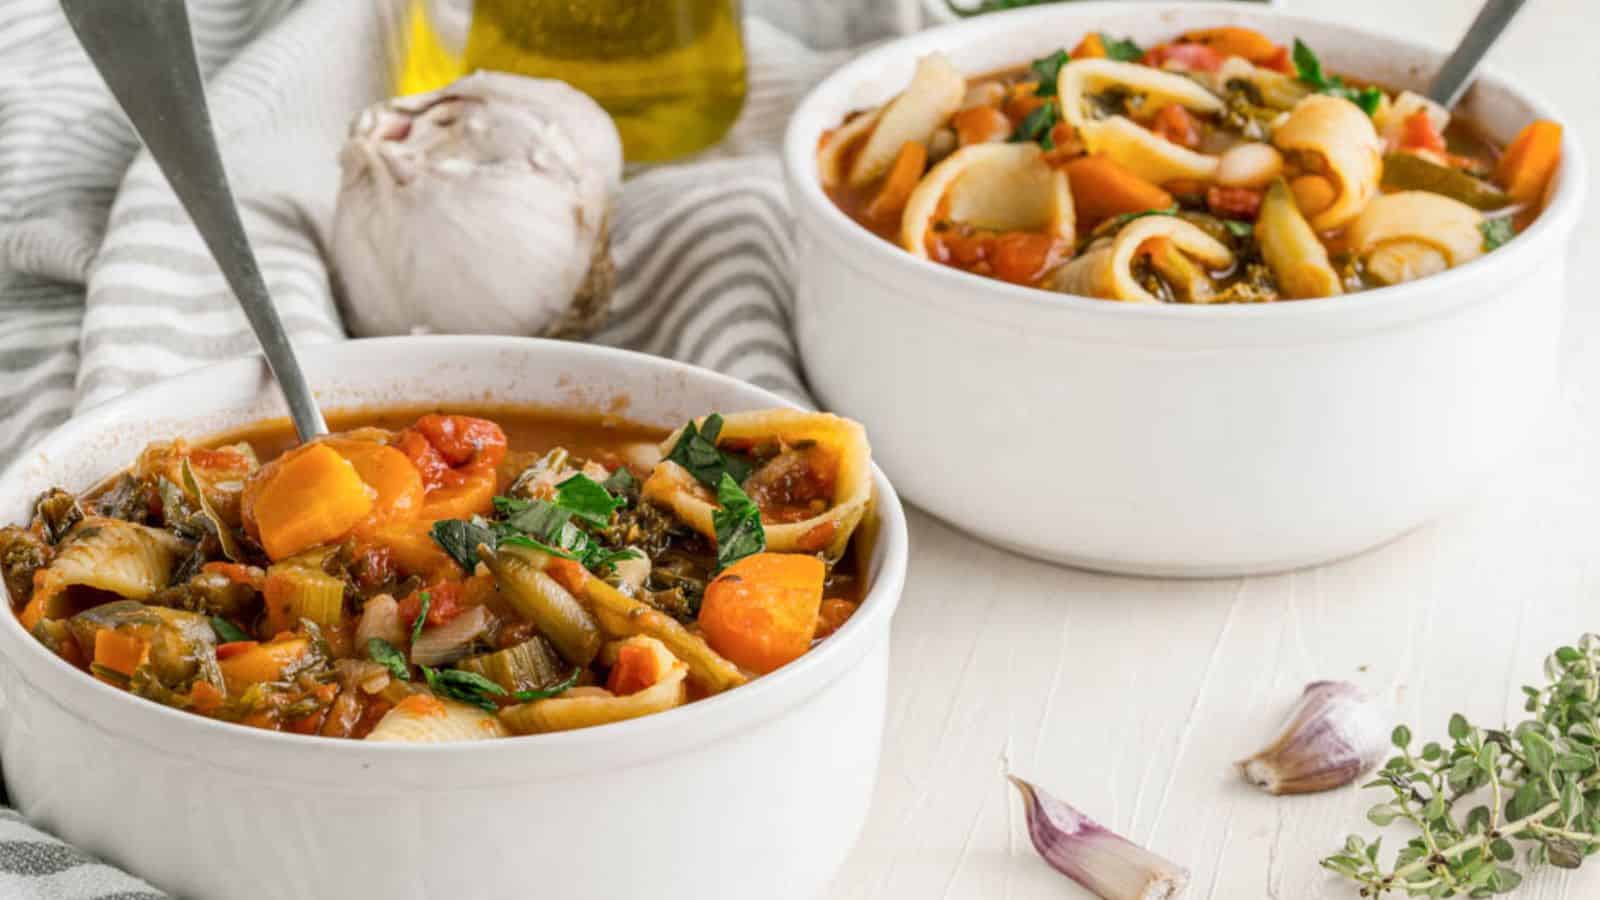 Two bowls of soup with pasta and vegetables.